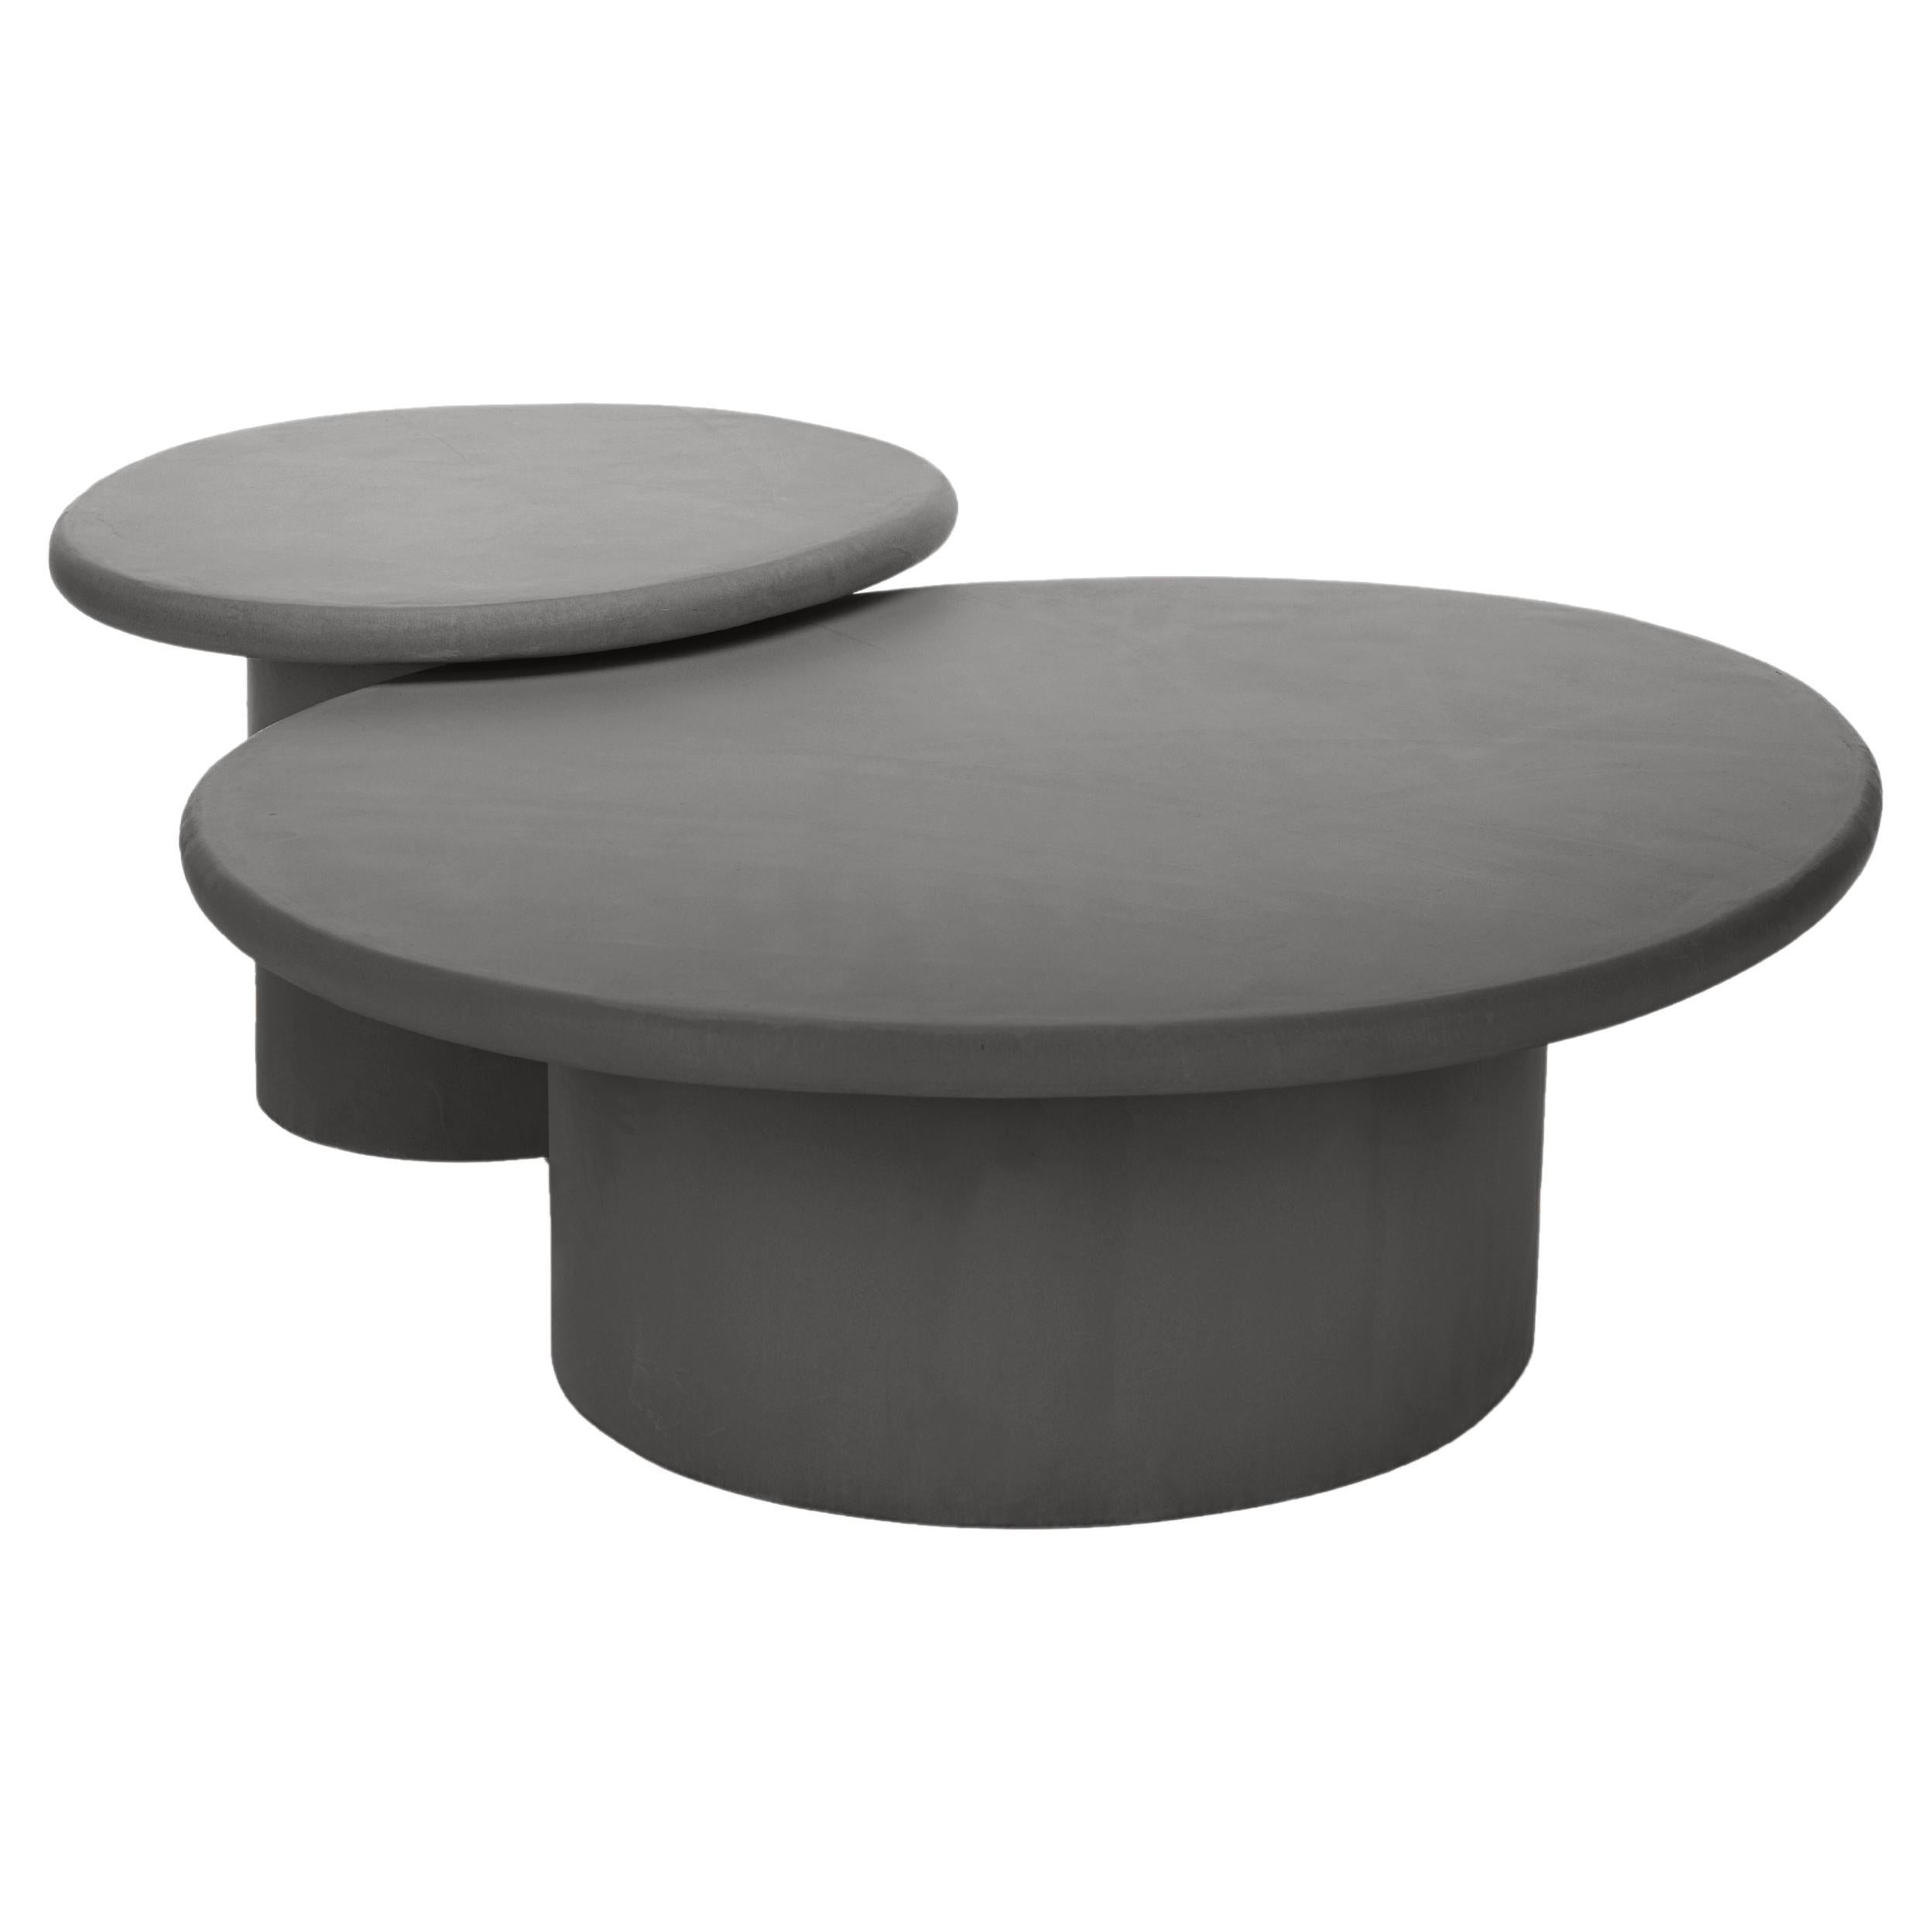 Organic Shaped Mortex Coffee Table Set "Sami" BM57 by Isabelle Beaumont For Sale